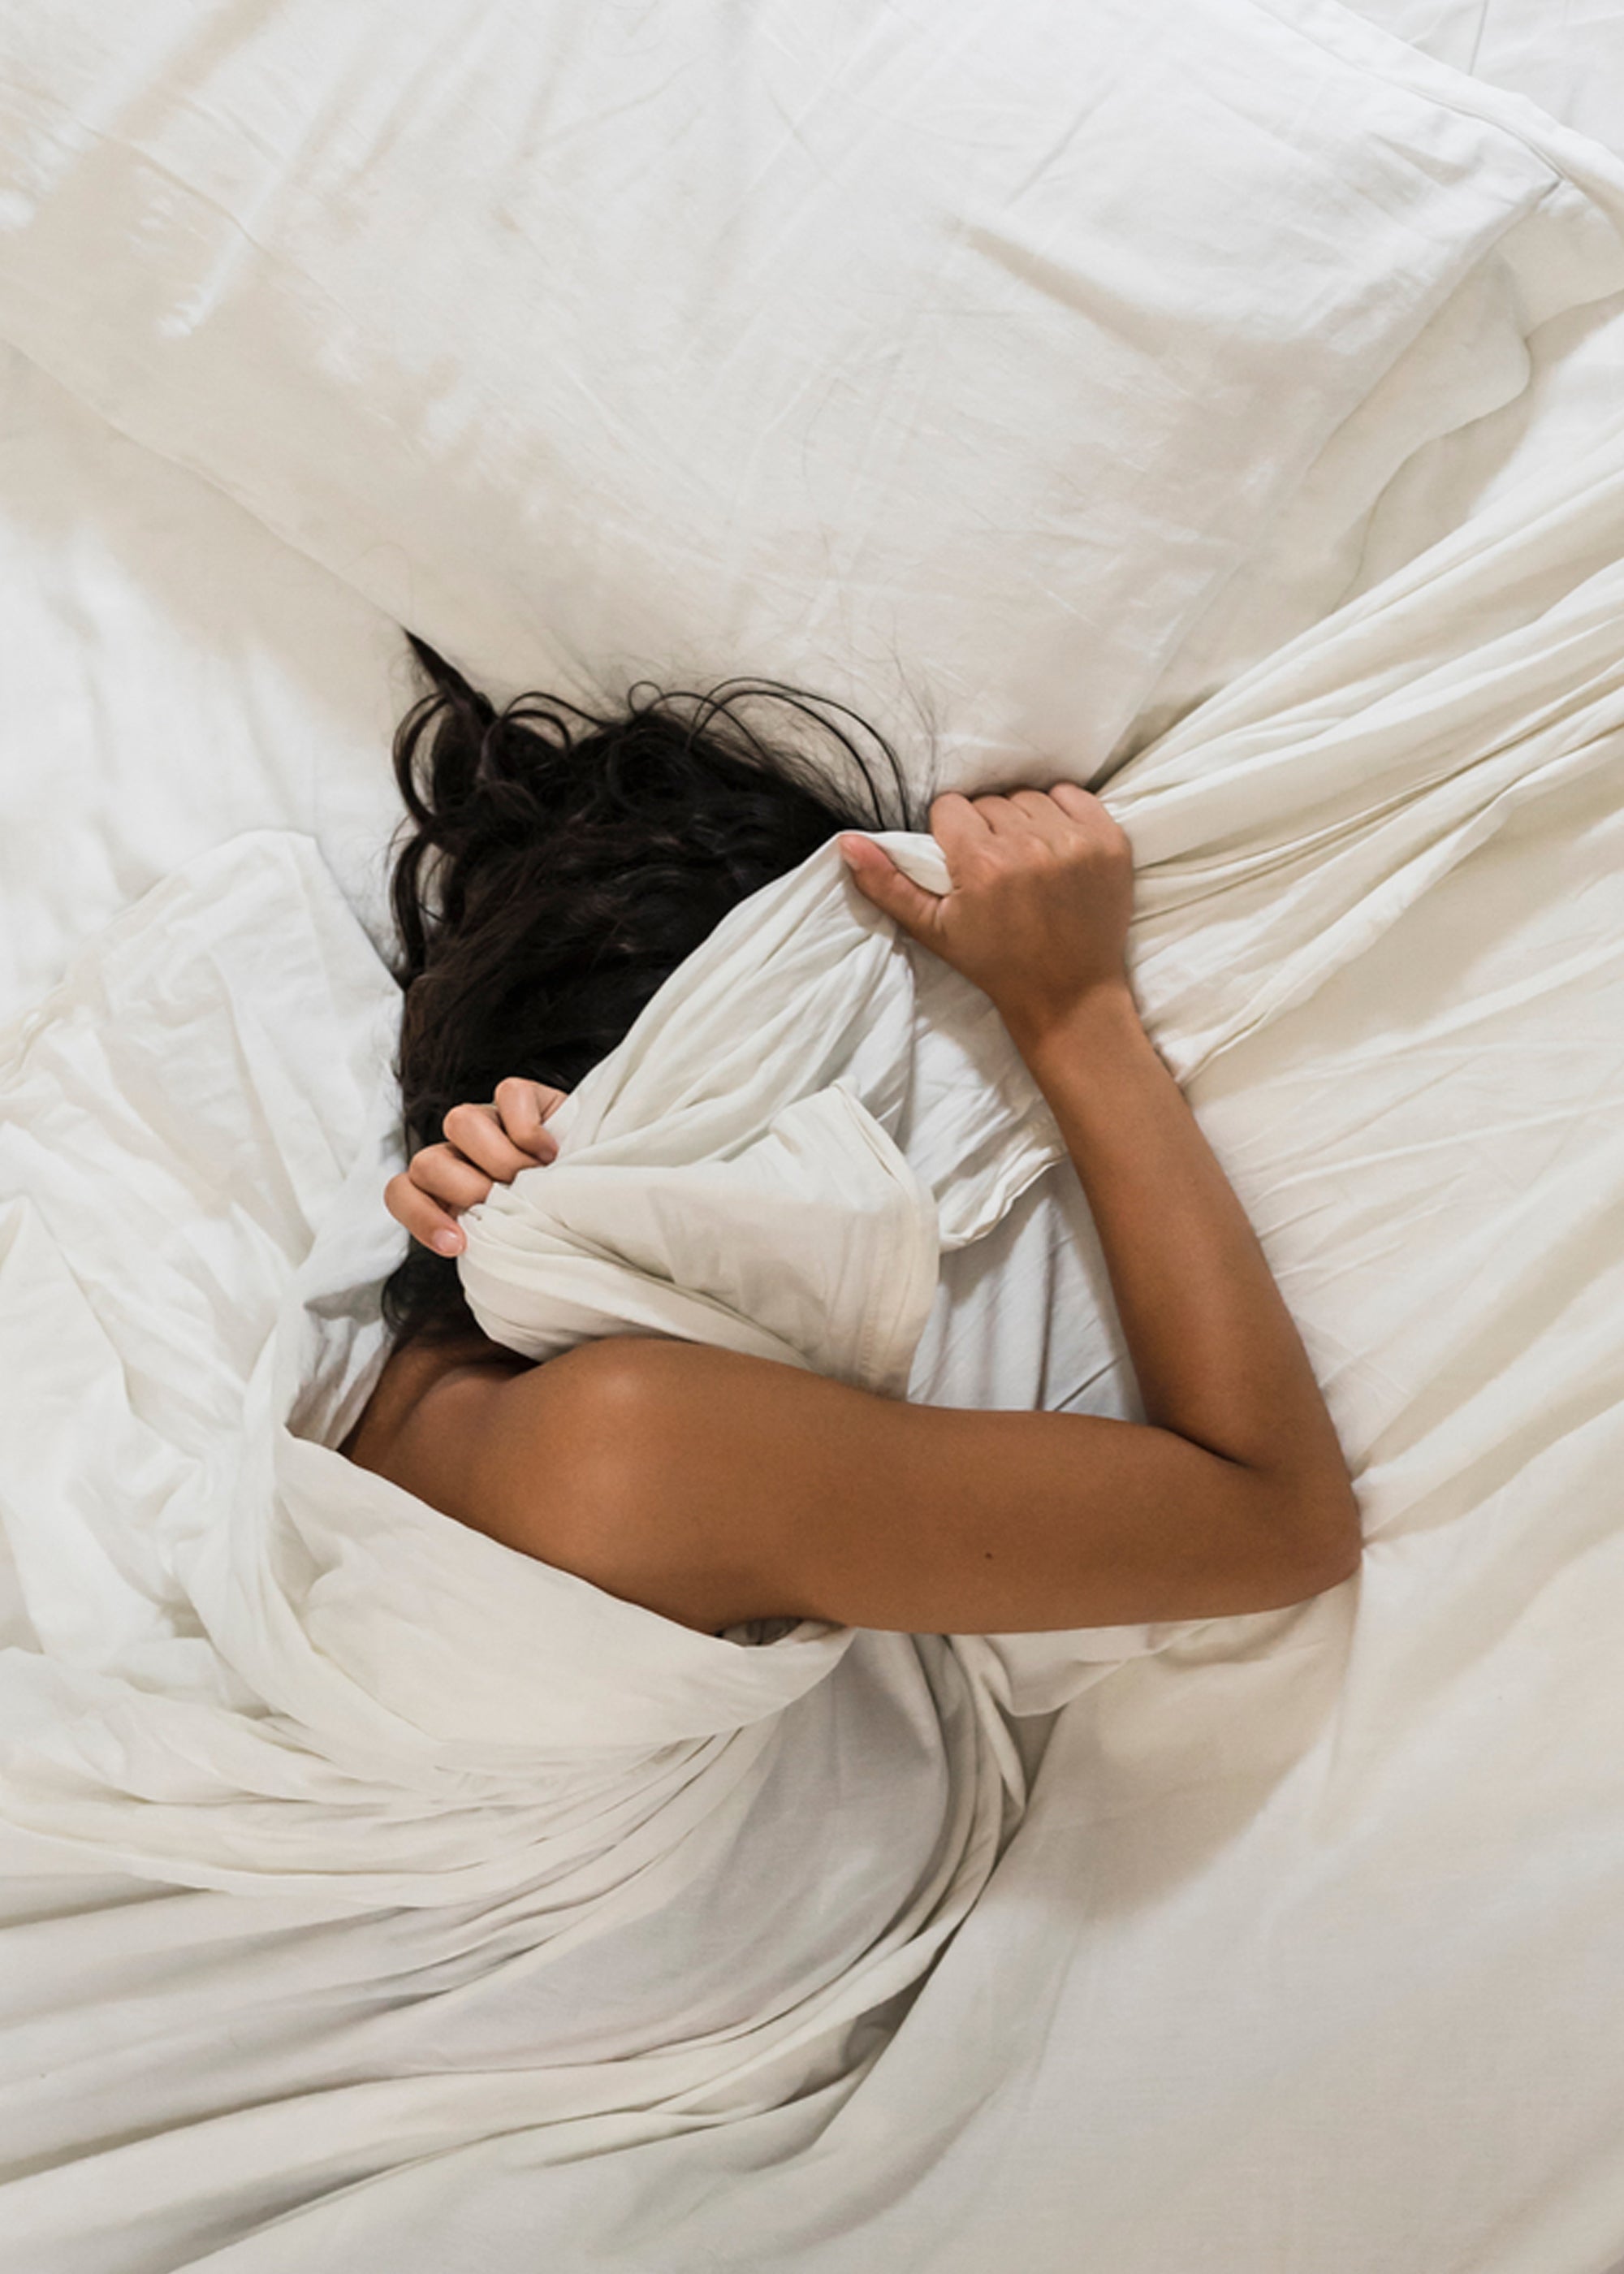 A Definitive Guide To The The Best And Worst Sleep Positions Bed Threads